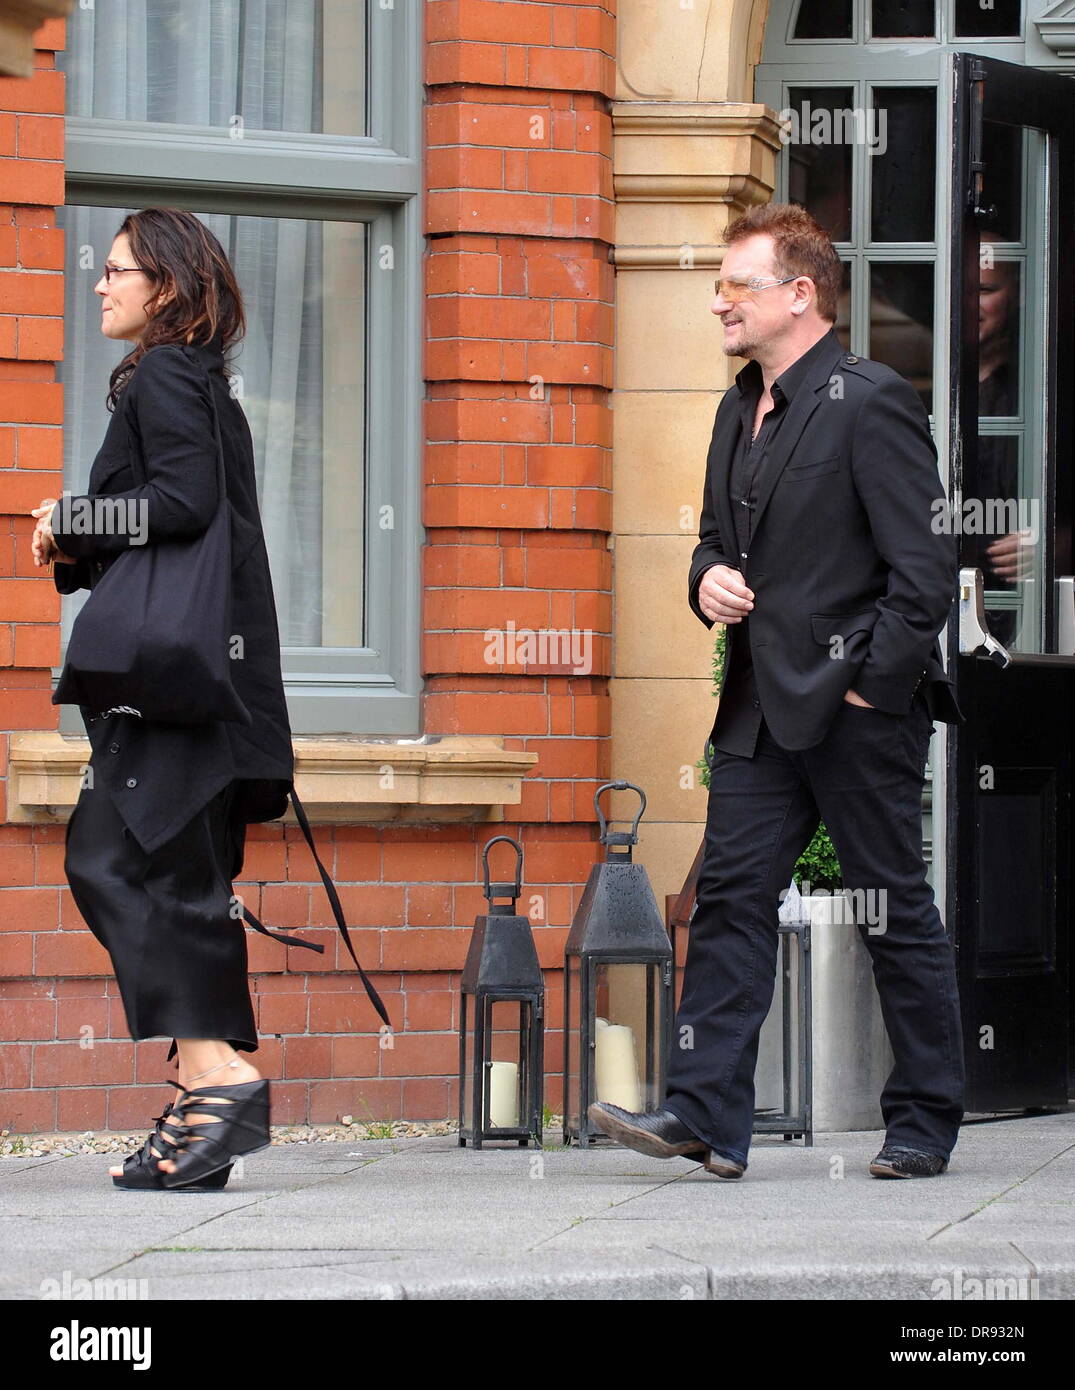 Ali Hewson and Bono U2 guitarist, The Edge meets Bono at the Dylan hotel amid reports that his mother Gwenda Evans has died Dublin, Ireland - 13.06.12 Stock Photo